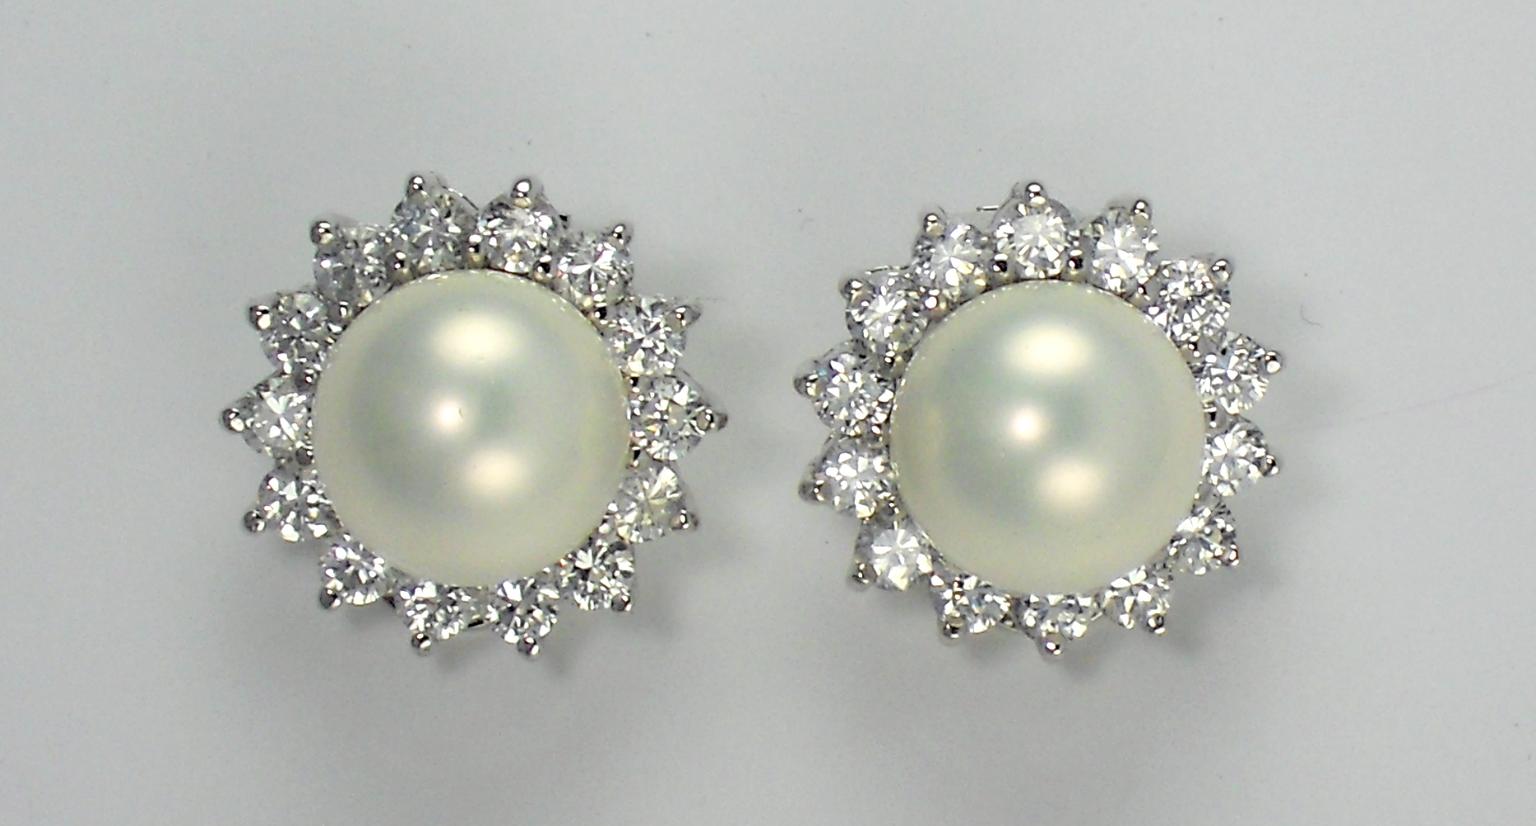 CIRO. Sterling silver rhodium plated shell pearl earrings with brilliant cut cubic zirconia stones.jpg